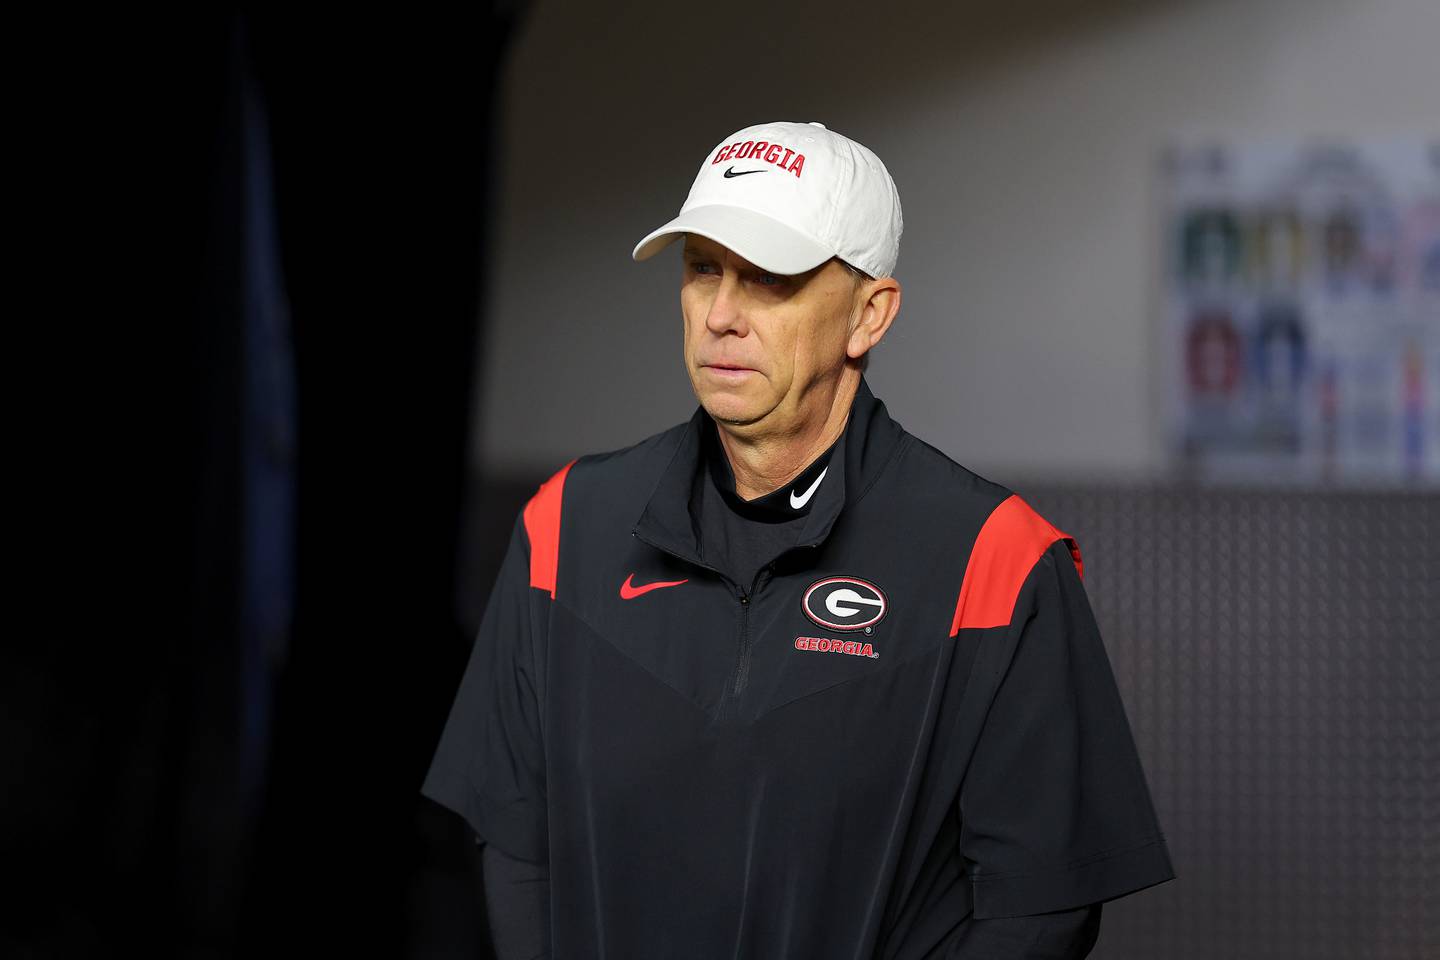 INGLEWOOD, CALIFORNIA - JANUARY 09: Georgia Bulldogs offensive coordinator Todd Monken looks on before the College Football Playoff National Championship game against the TCU Horned Frogs at SoFi Stadium on January 09, 2023 in Inglewood, California.